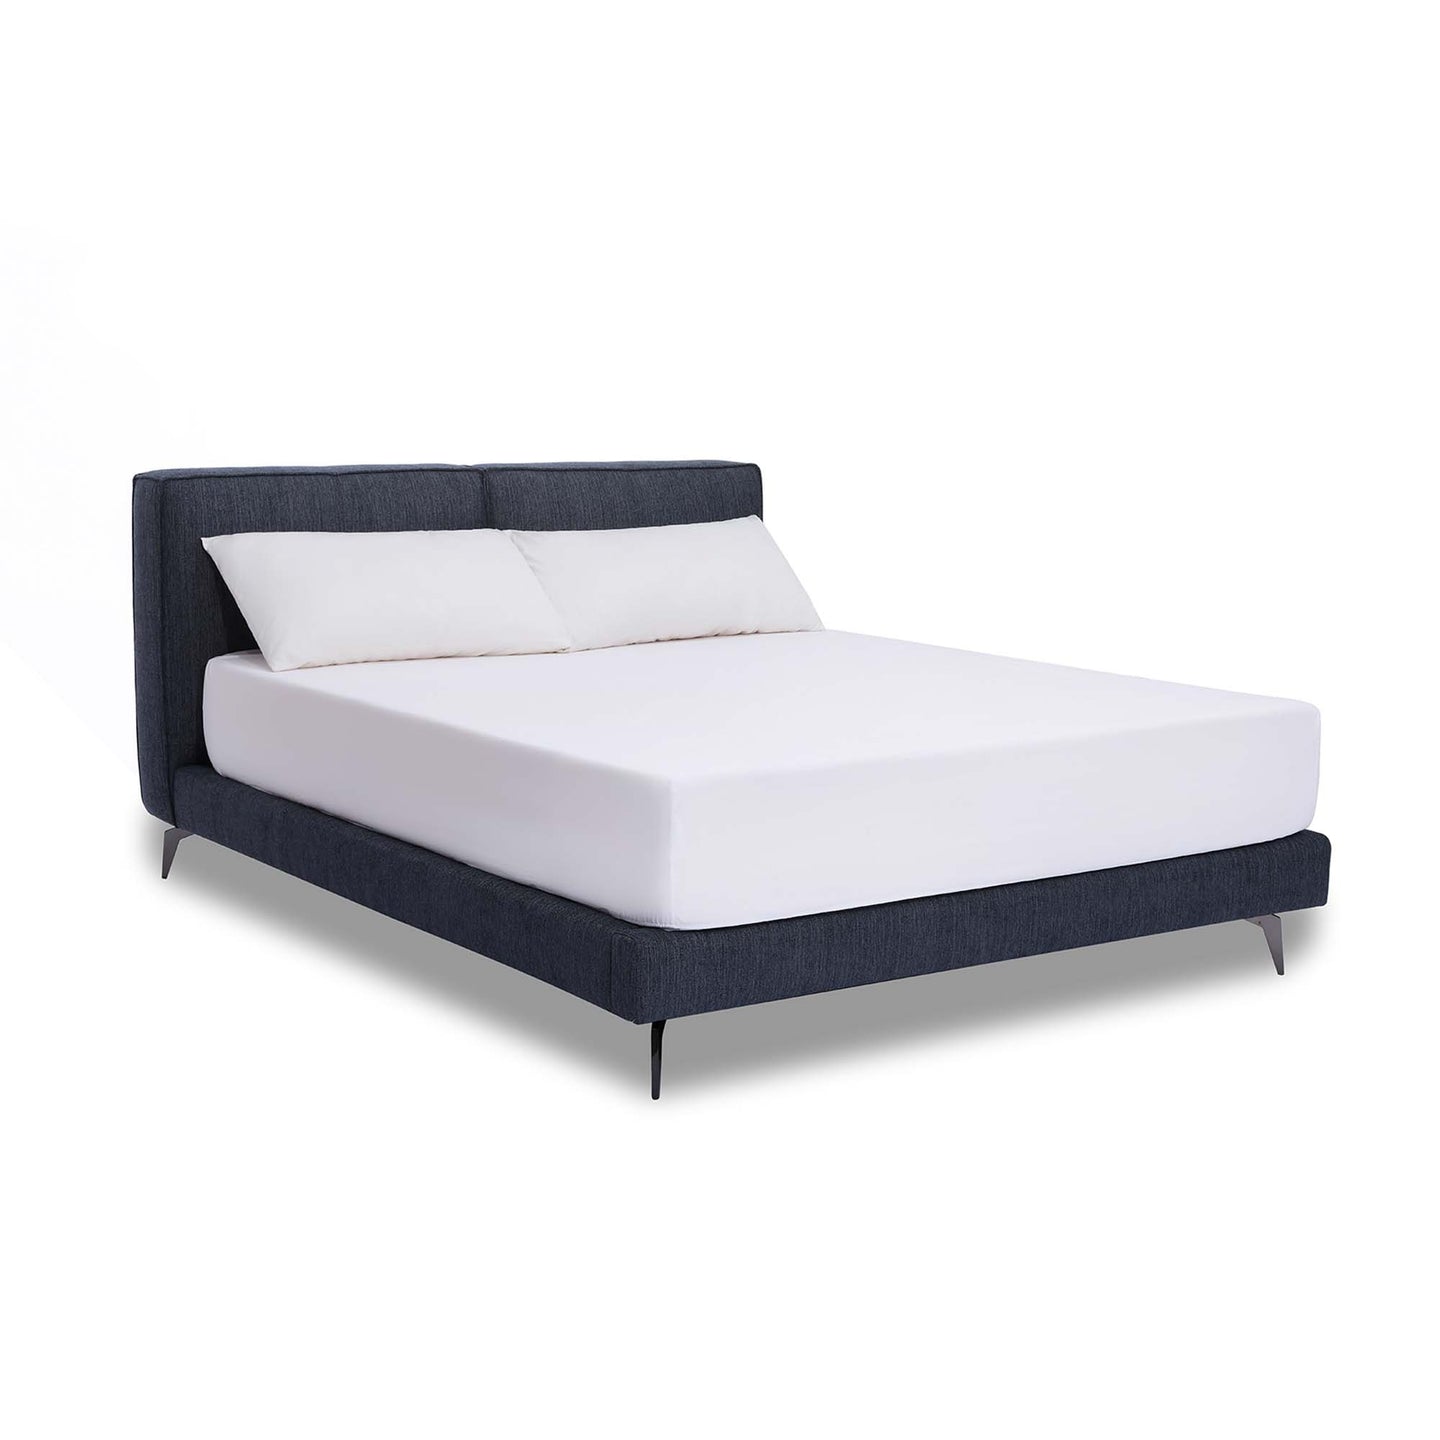 The Emery bedframe features a cushioned headboard, the flat surface can serve as a shelf for small items like phones, glasses and more. Additionally, the platform structure facilitates simple sheet-changing without having to lift the mattress - a feature your back is sure to appreciate. Choice of fabric available.